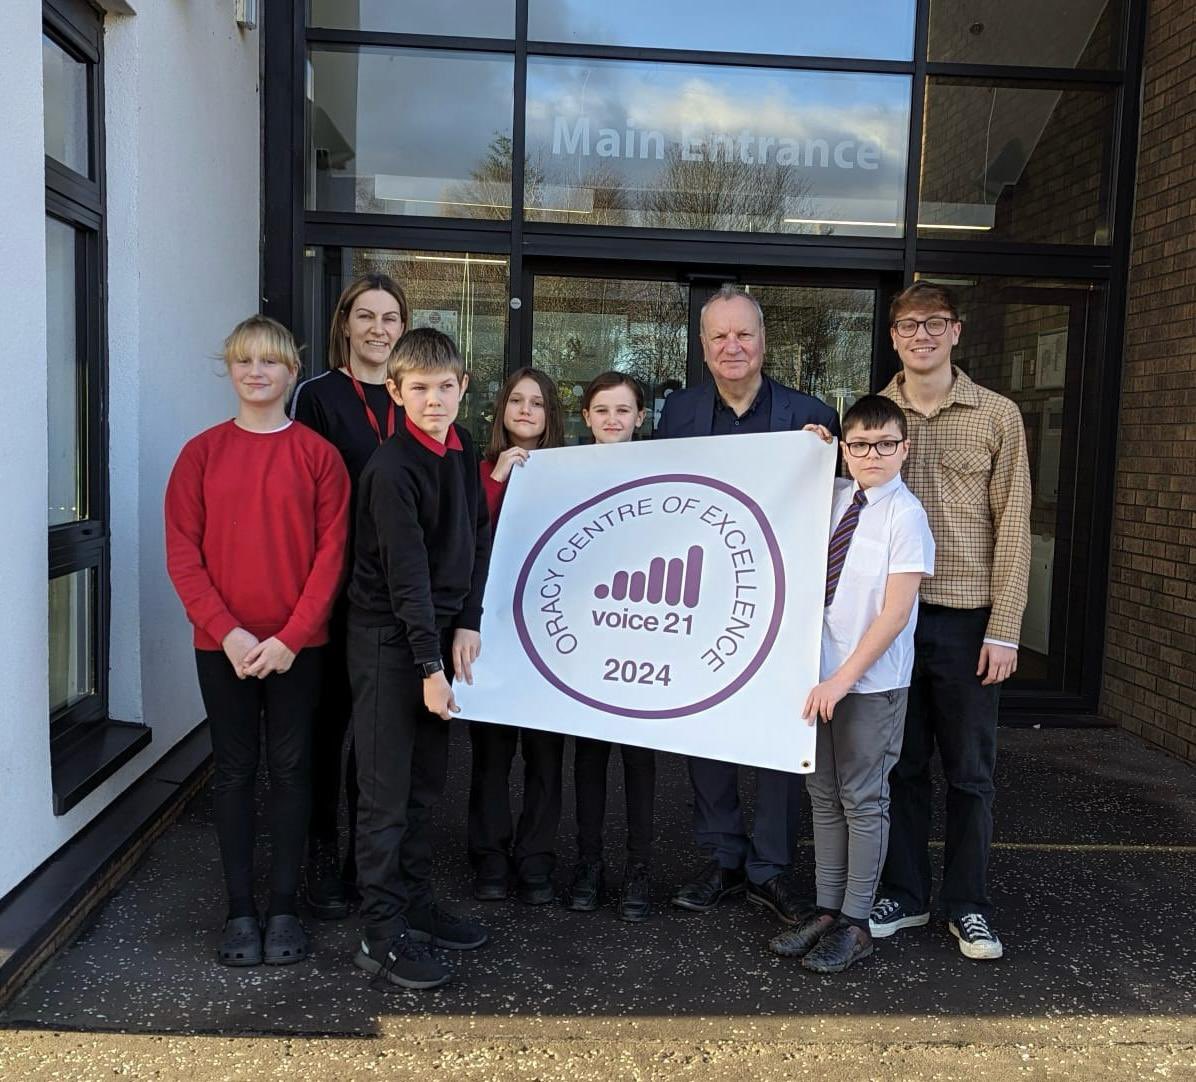 We are a @voice21oracy Centre of Excellence! Thank you again for visiting @PeteWishart